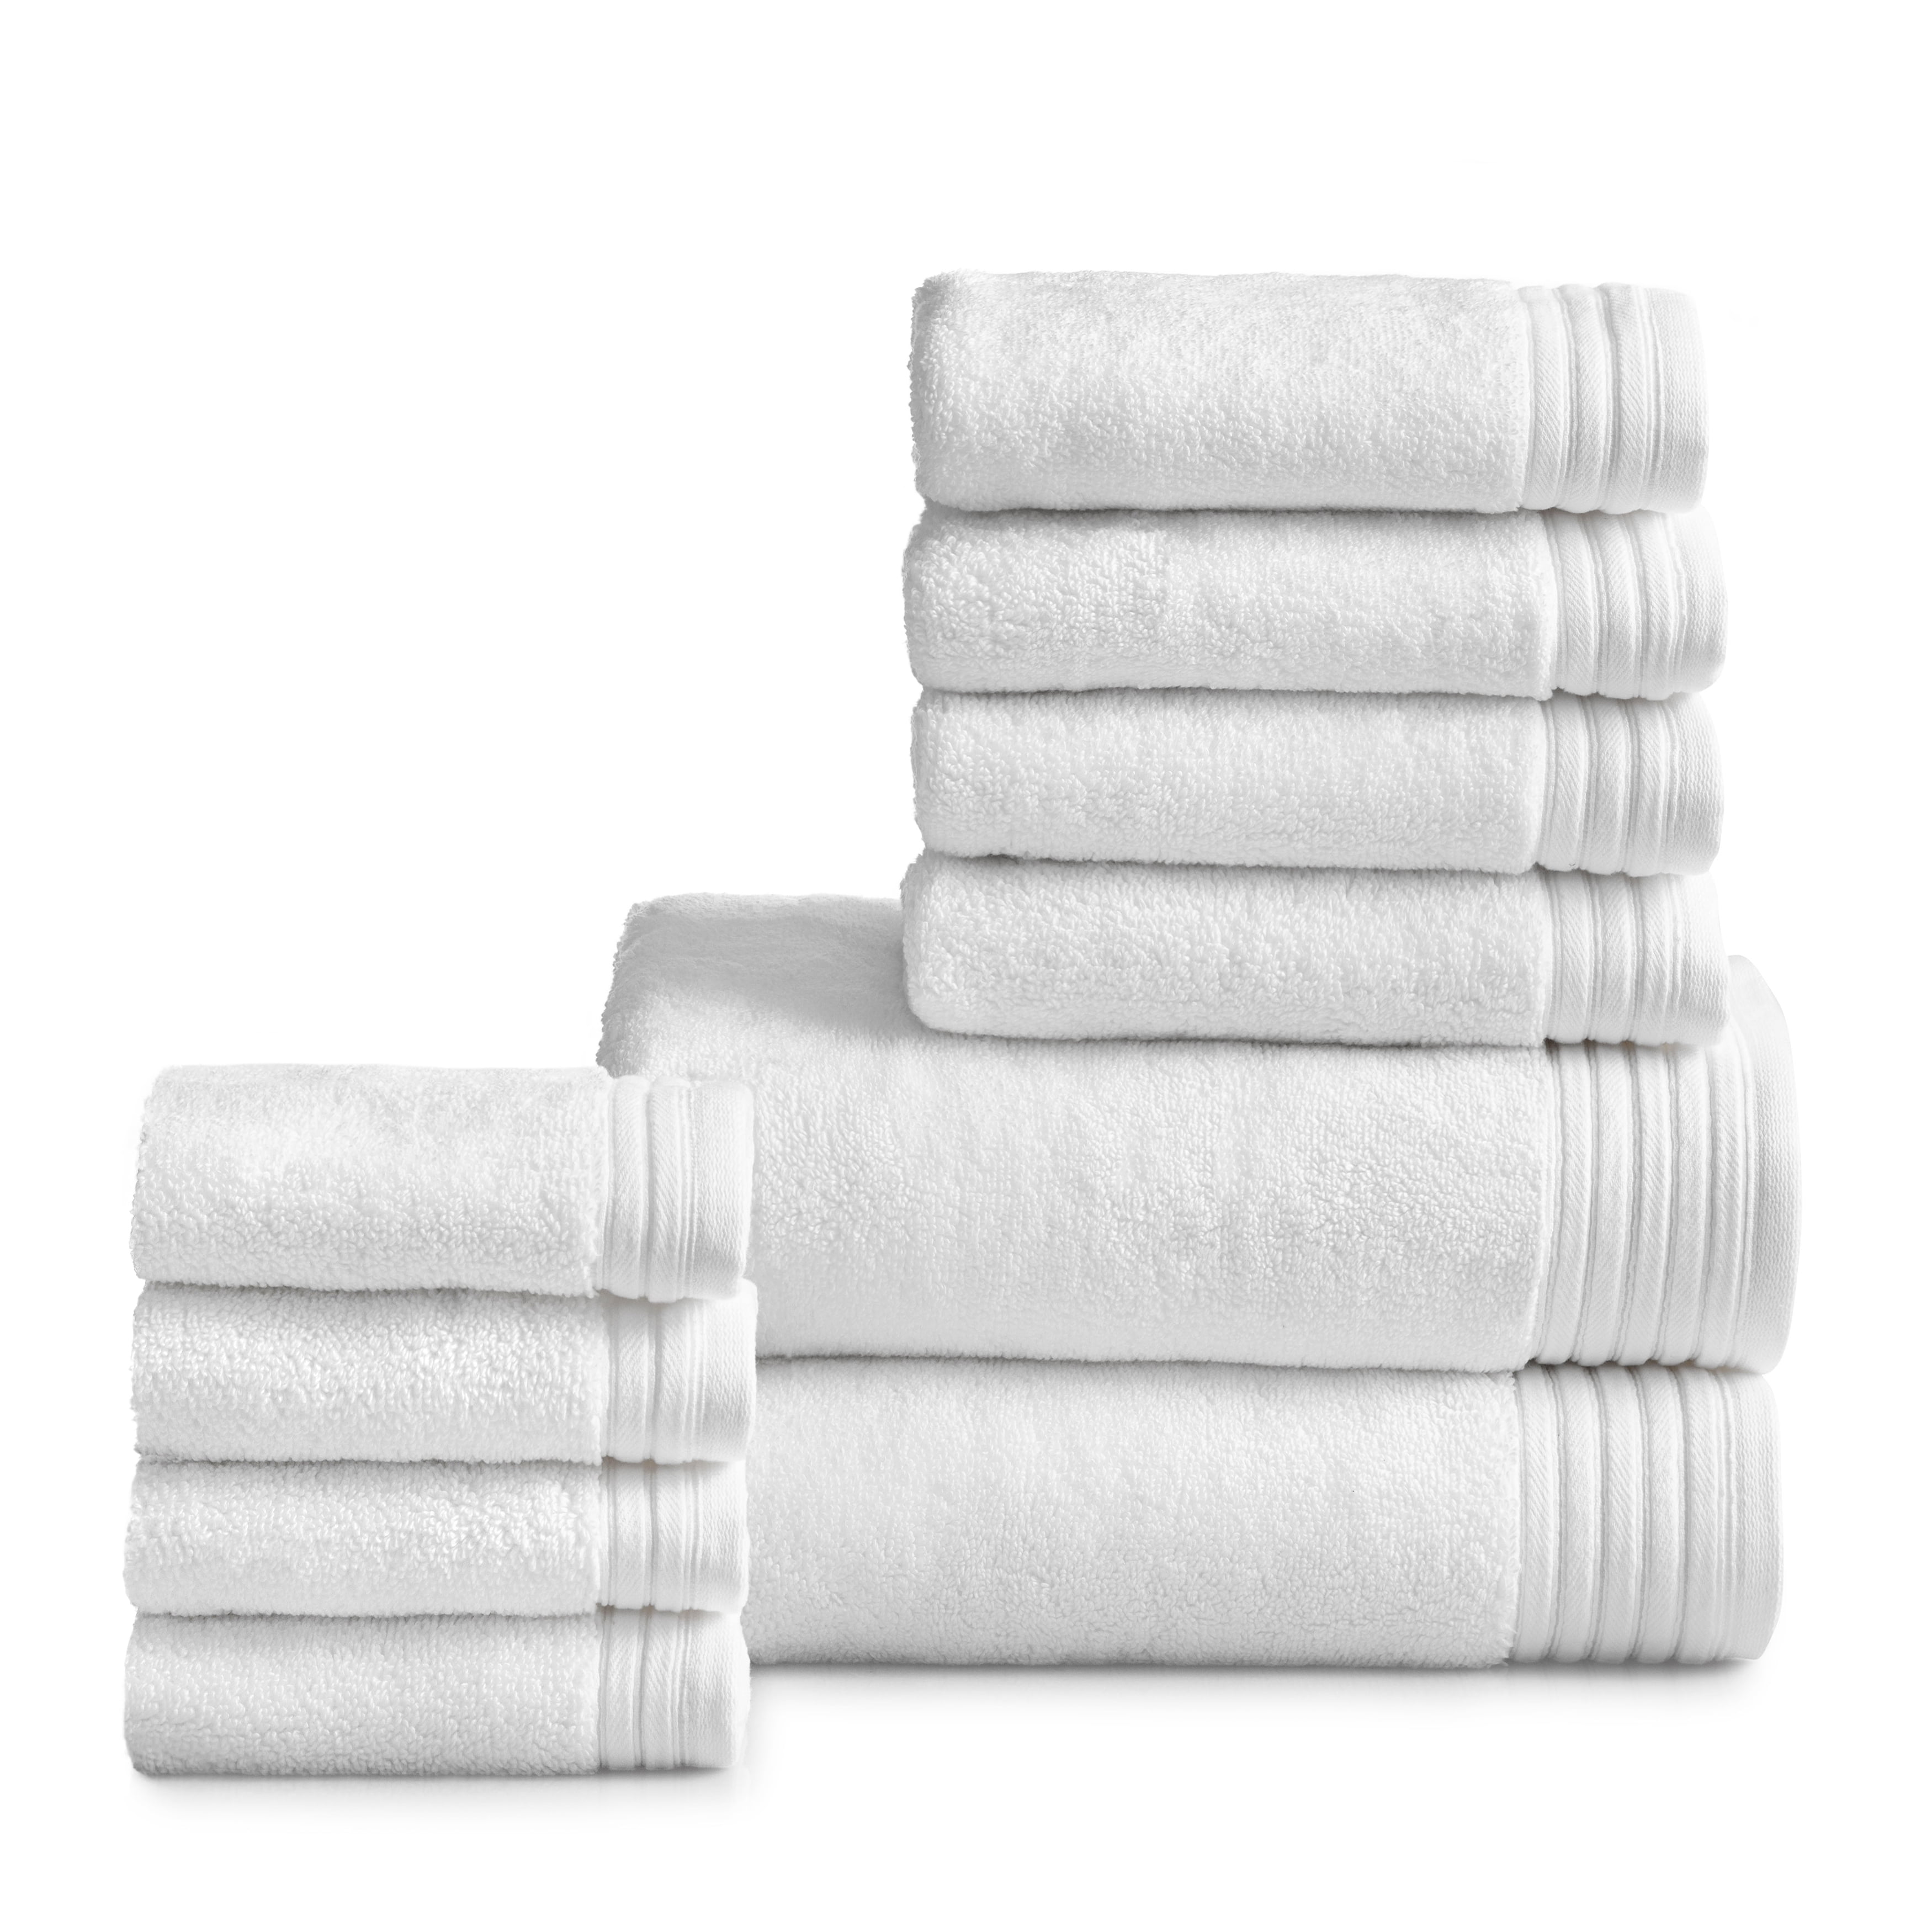 Five-star hotel pure white cotton towel thick bath towel super soft strong 